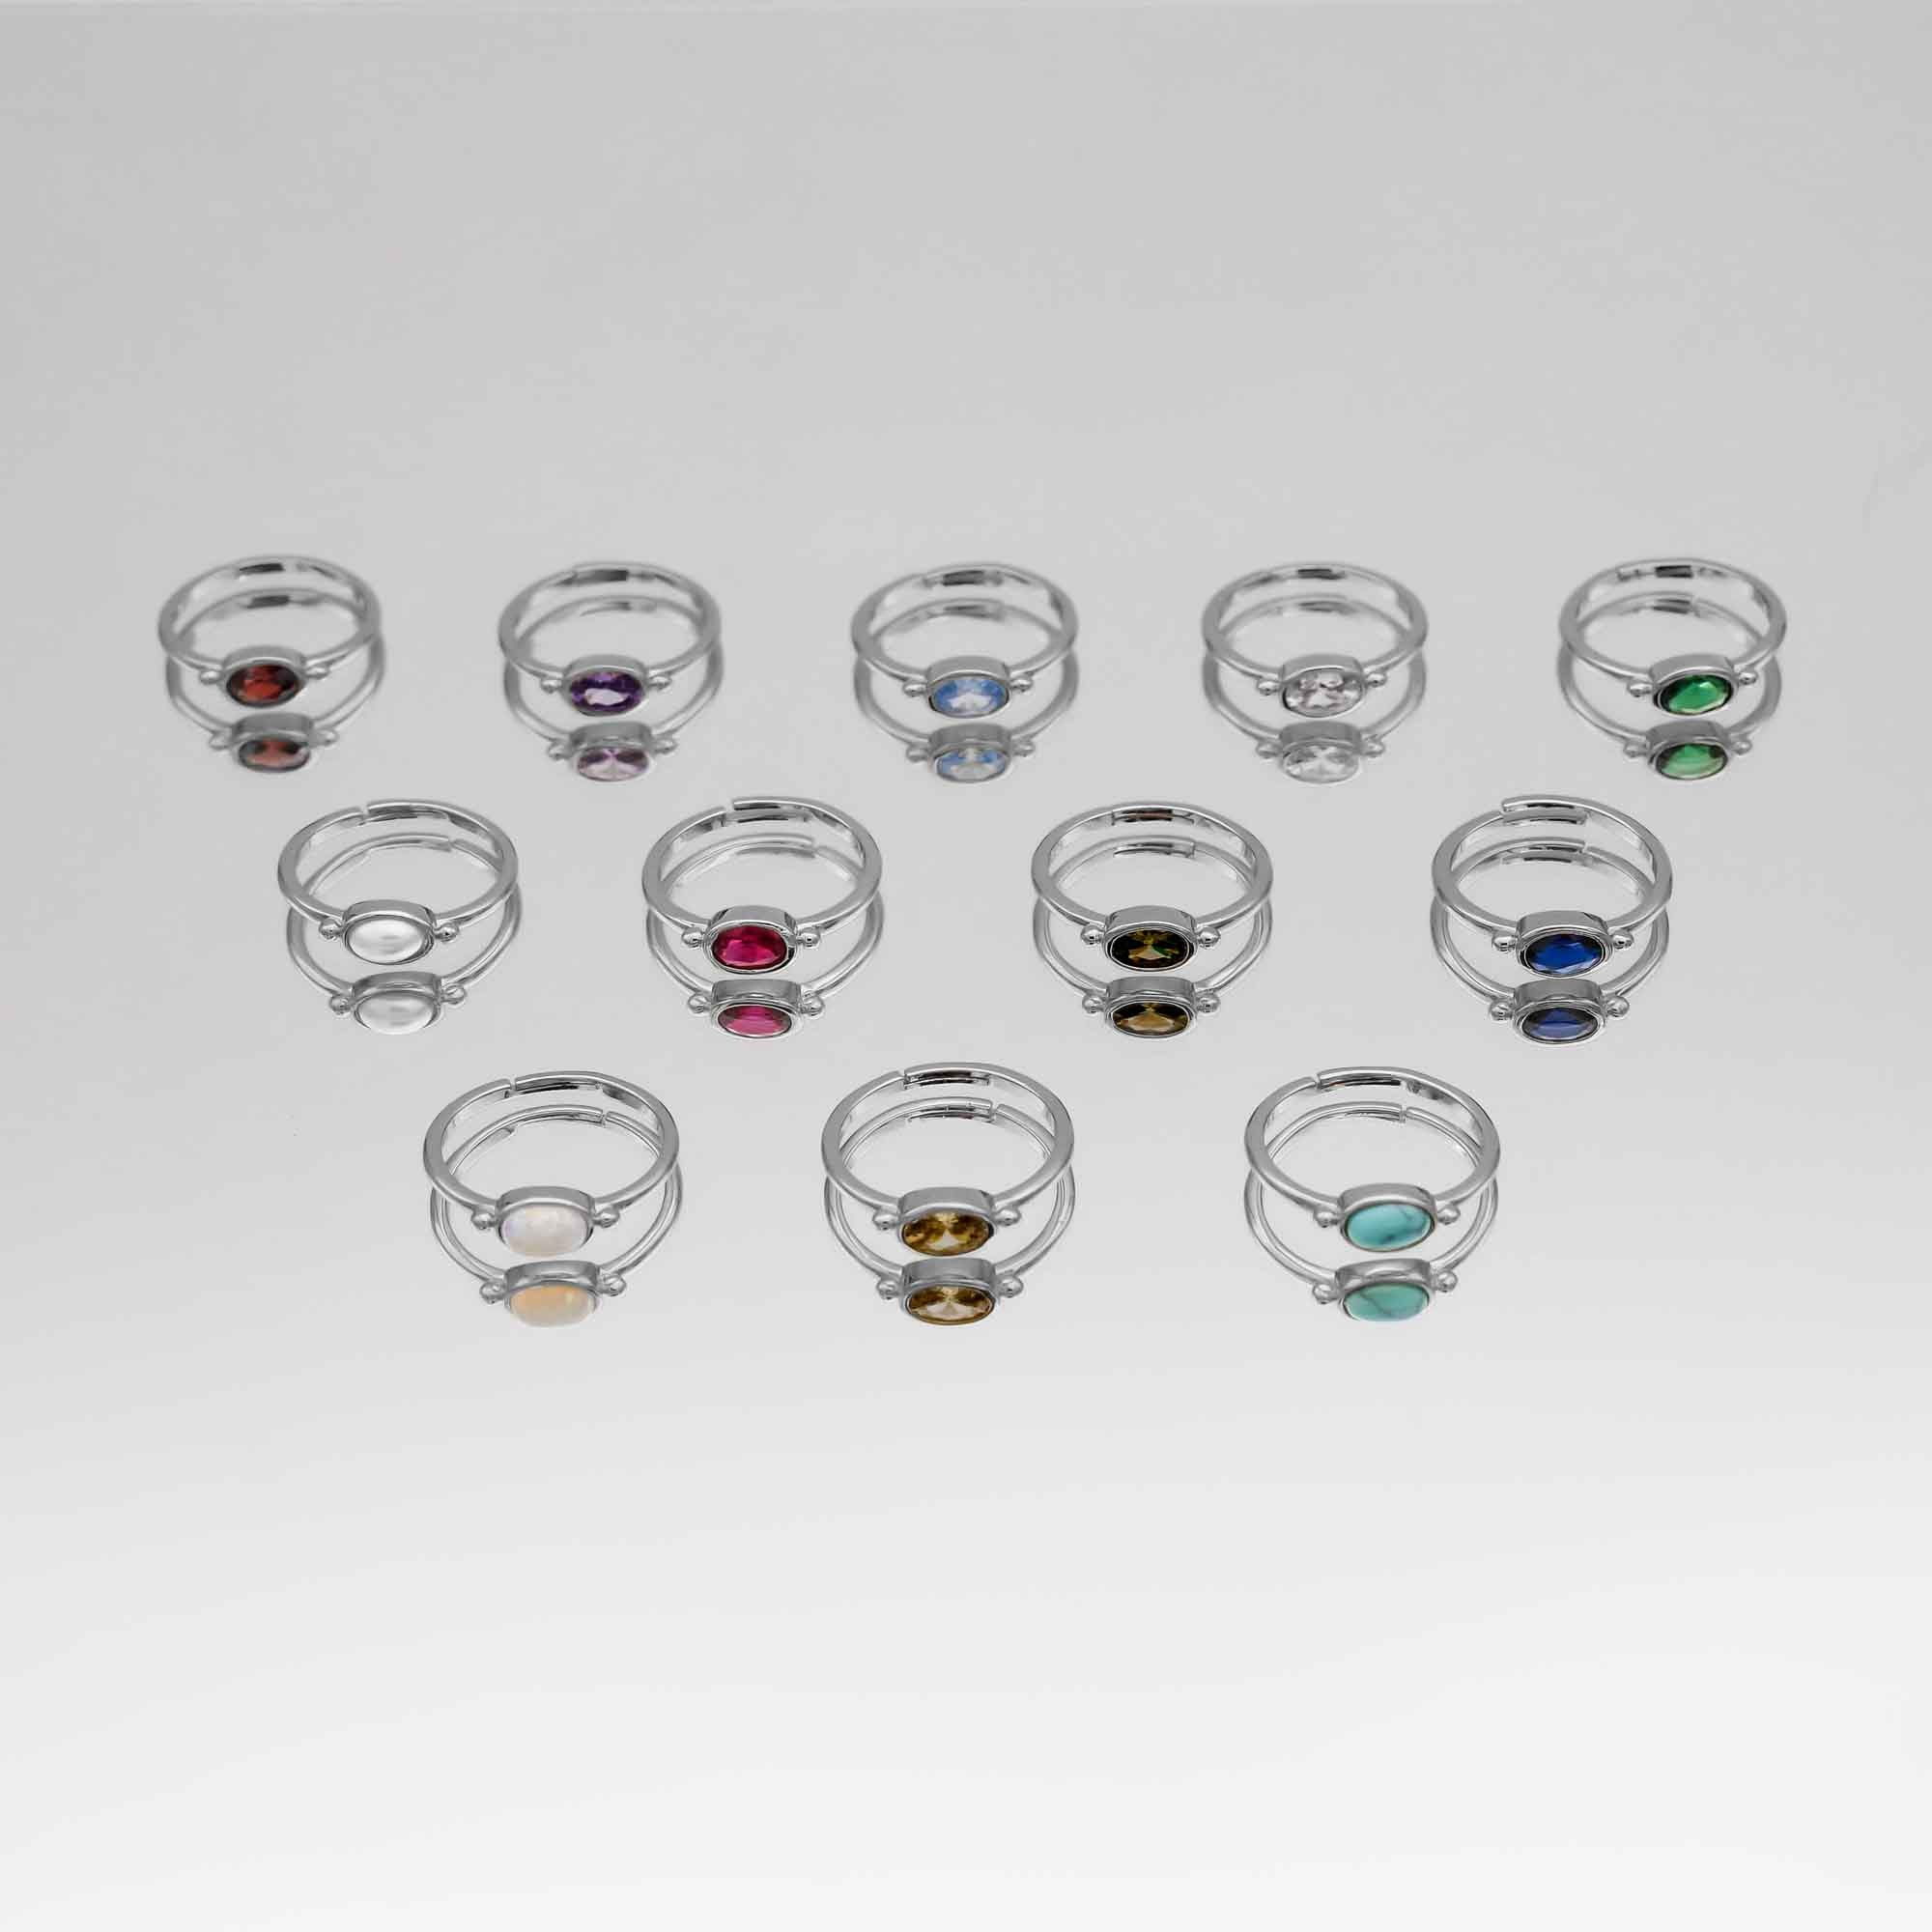 The birthstone jewellery collection of birthstone rings in silver